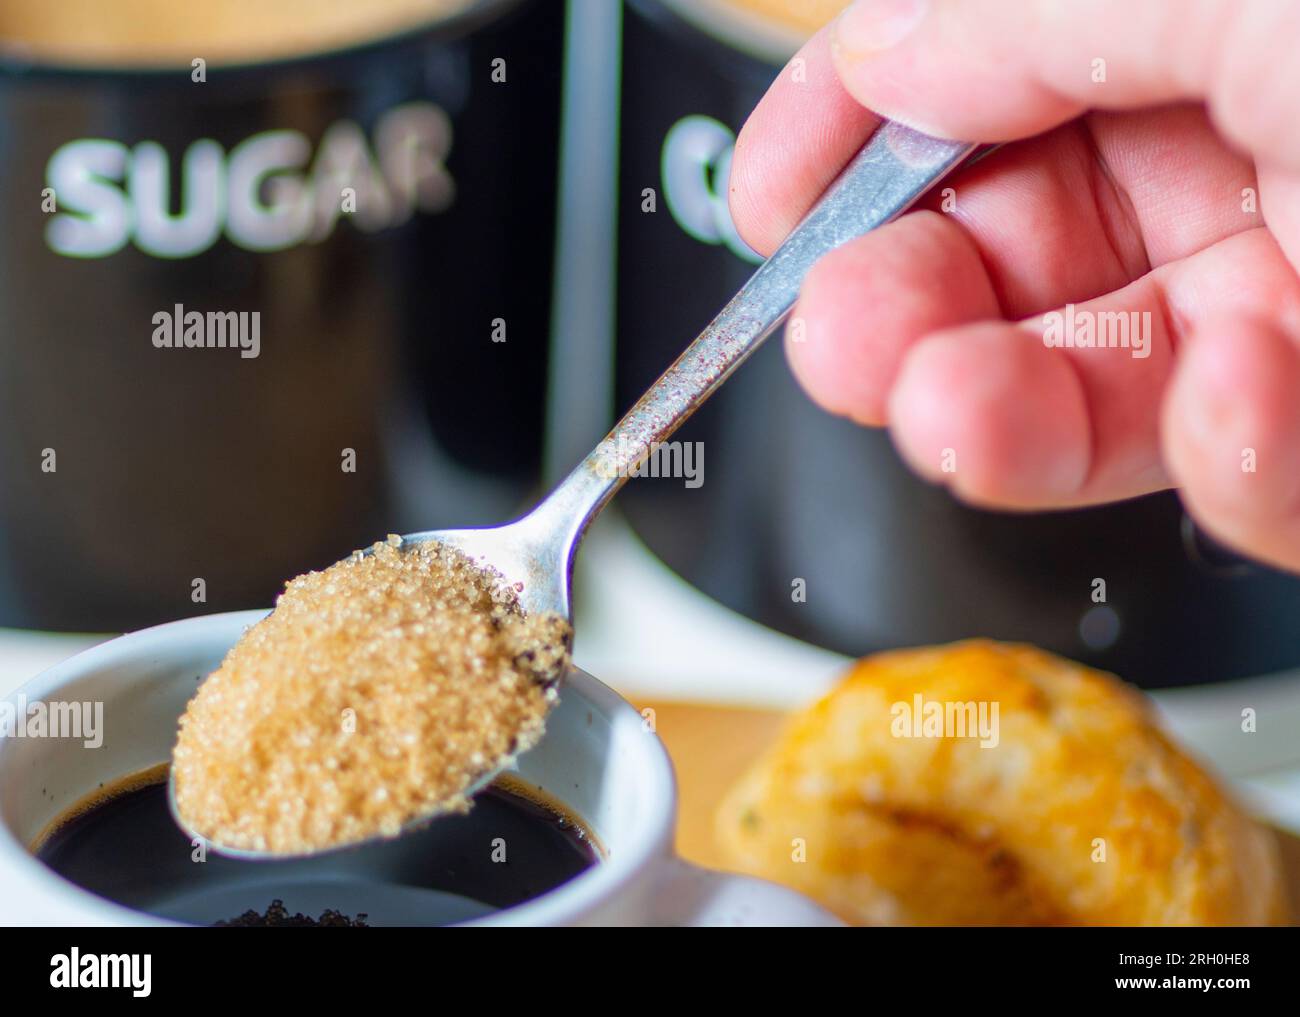 Freshly poured espresso,hot and ready to drink at breakfast,a silver spoon about to mix in brown sugar to sweeten,on a wood board, a bread roll,sugar Stock Photo